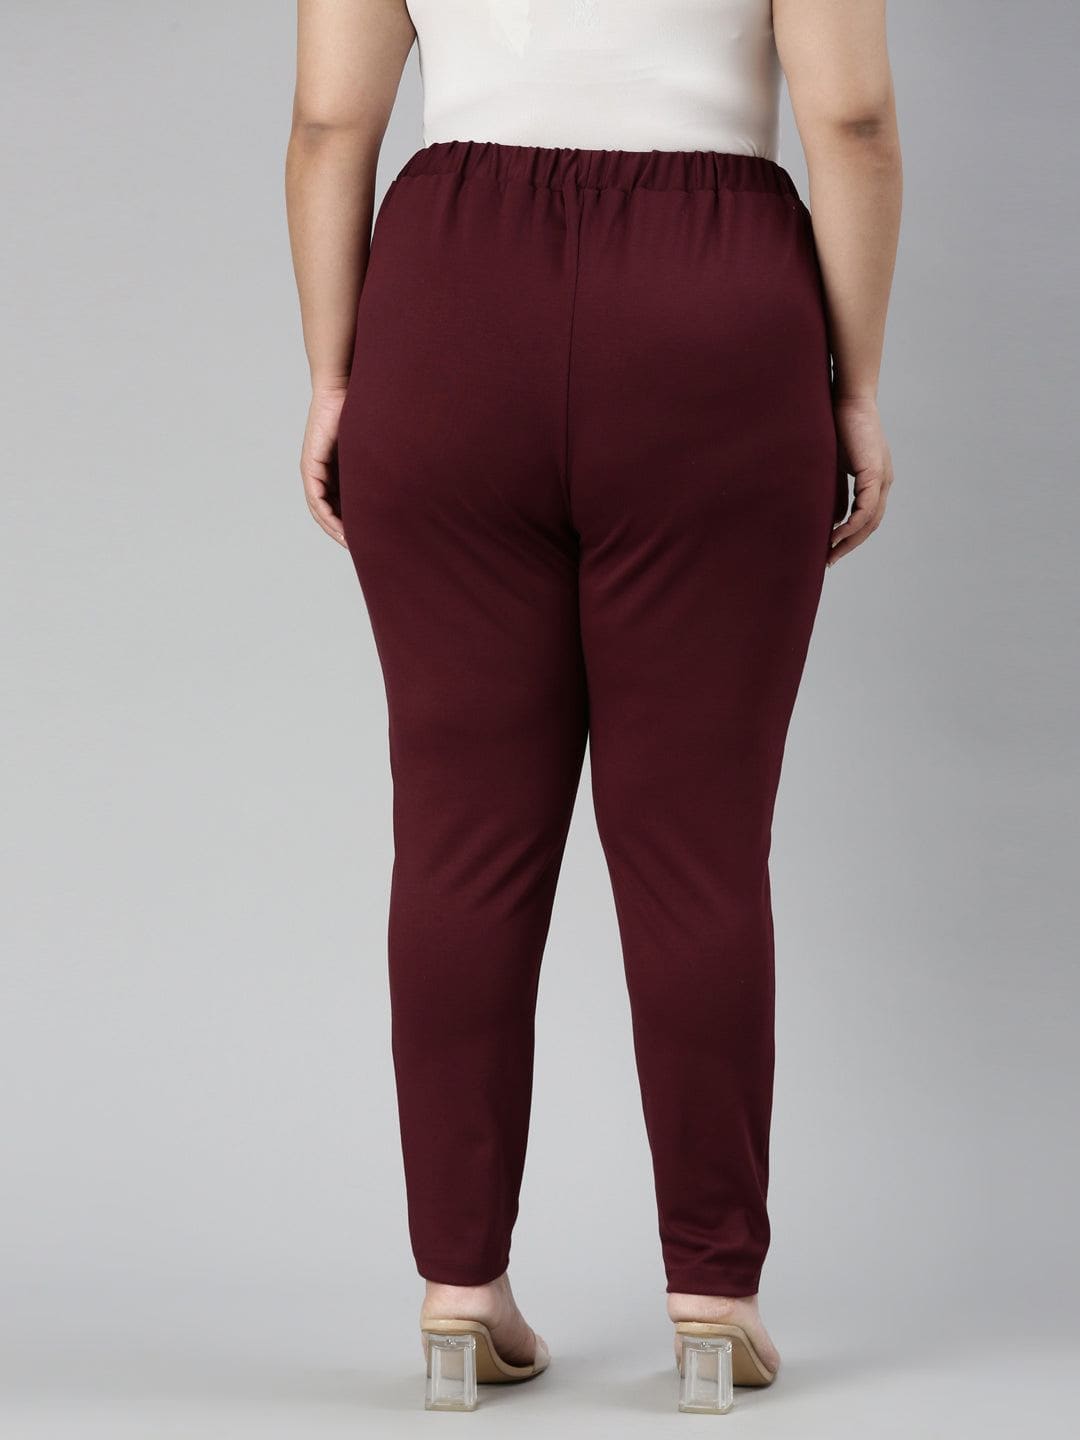 TheShaili - Women's Tapered fit Spandex Maroon Trousers